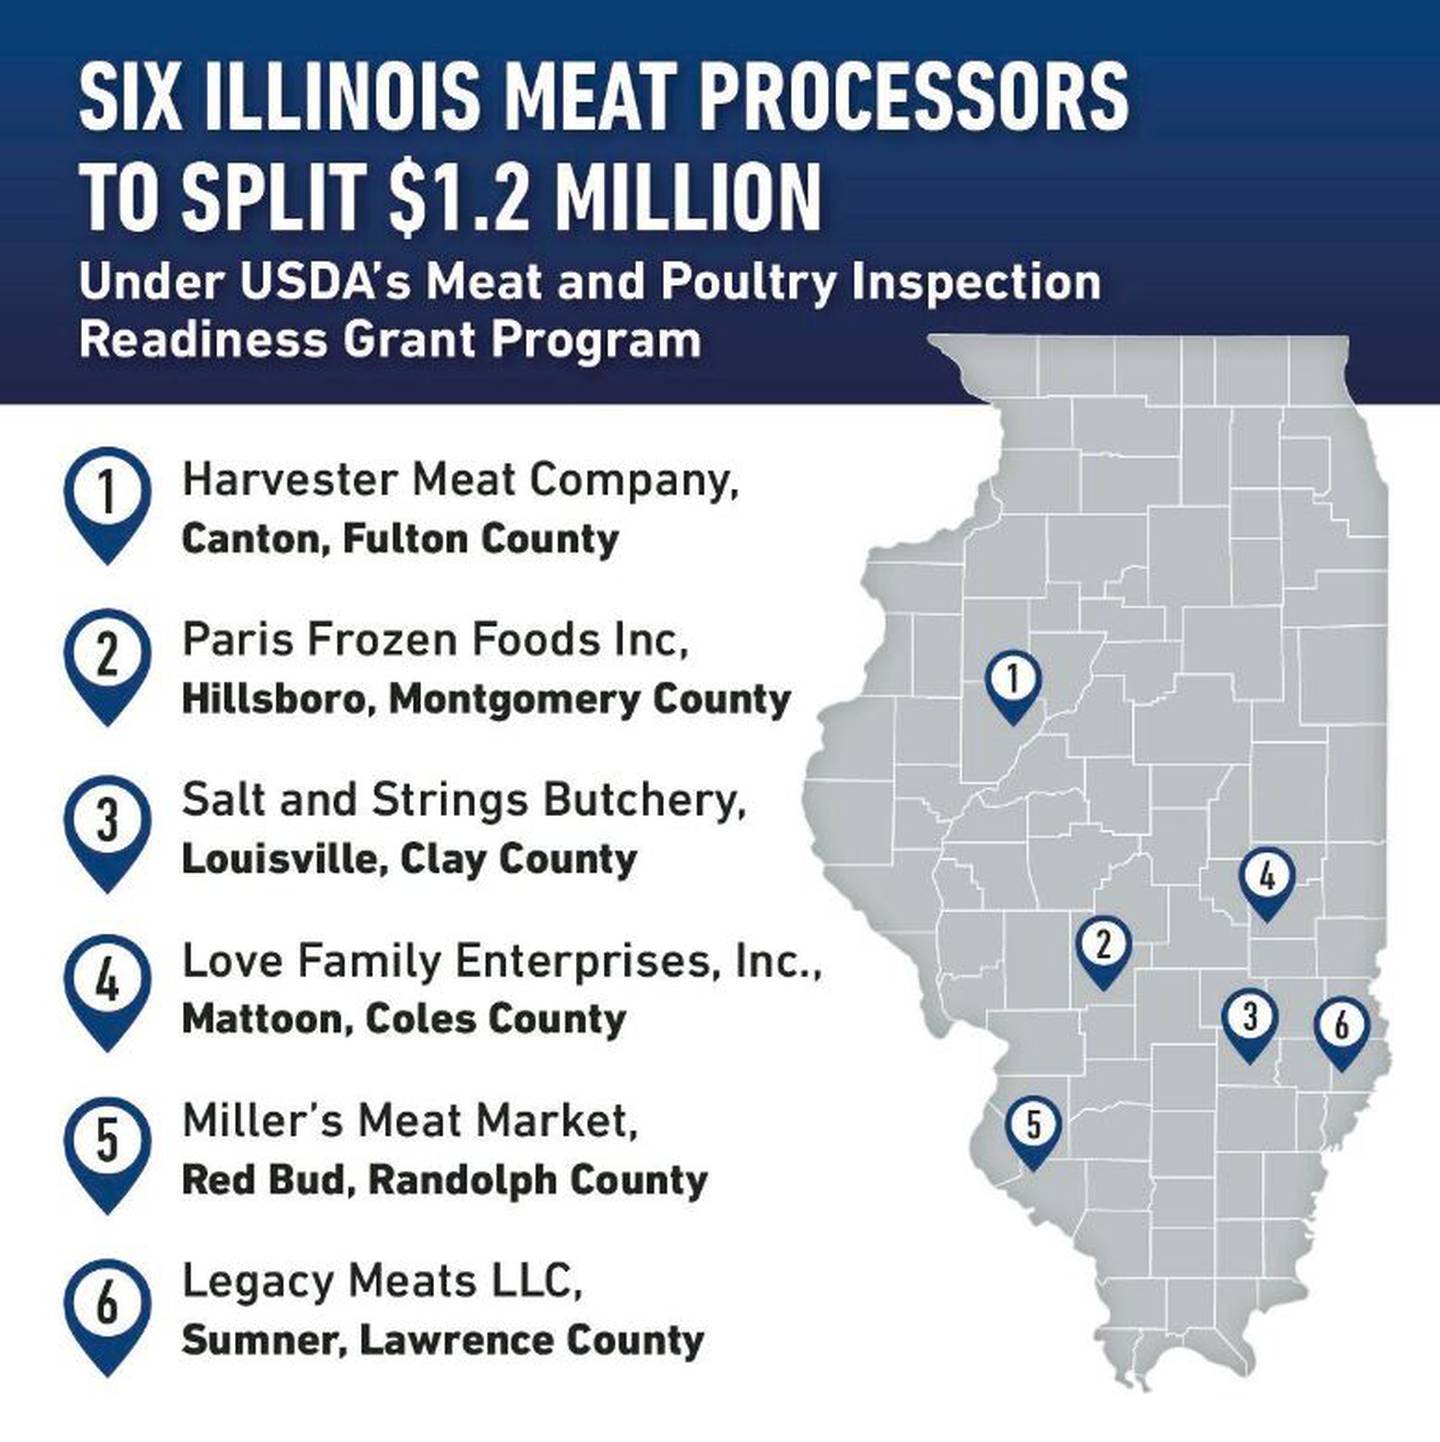 Illinois meat processors receive USDA funding to reach inspection